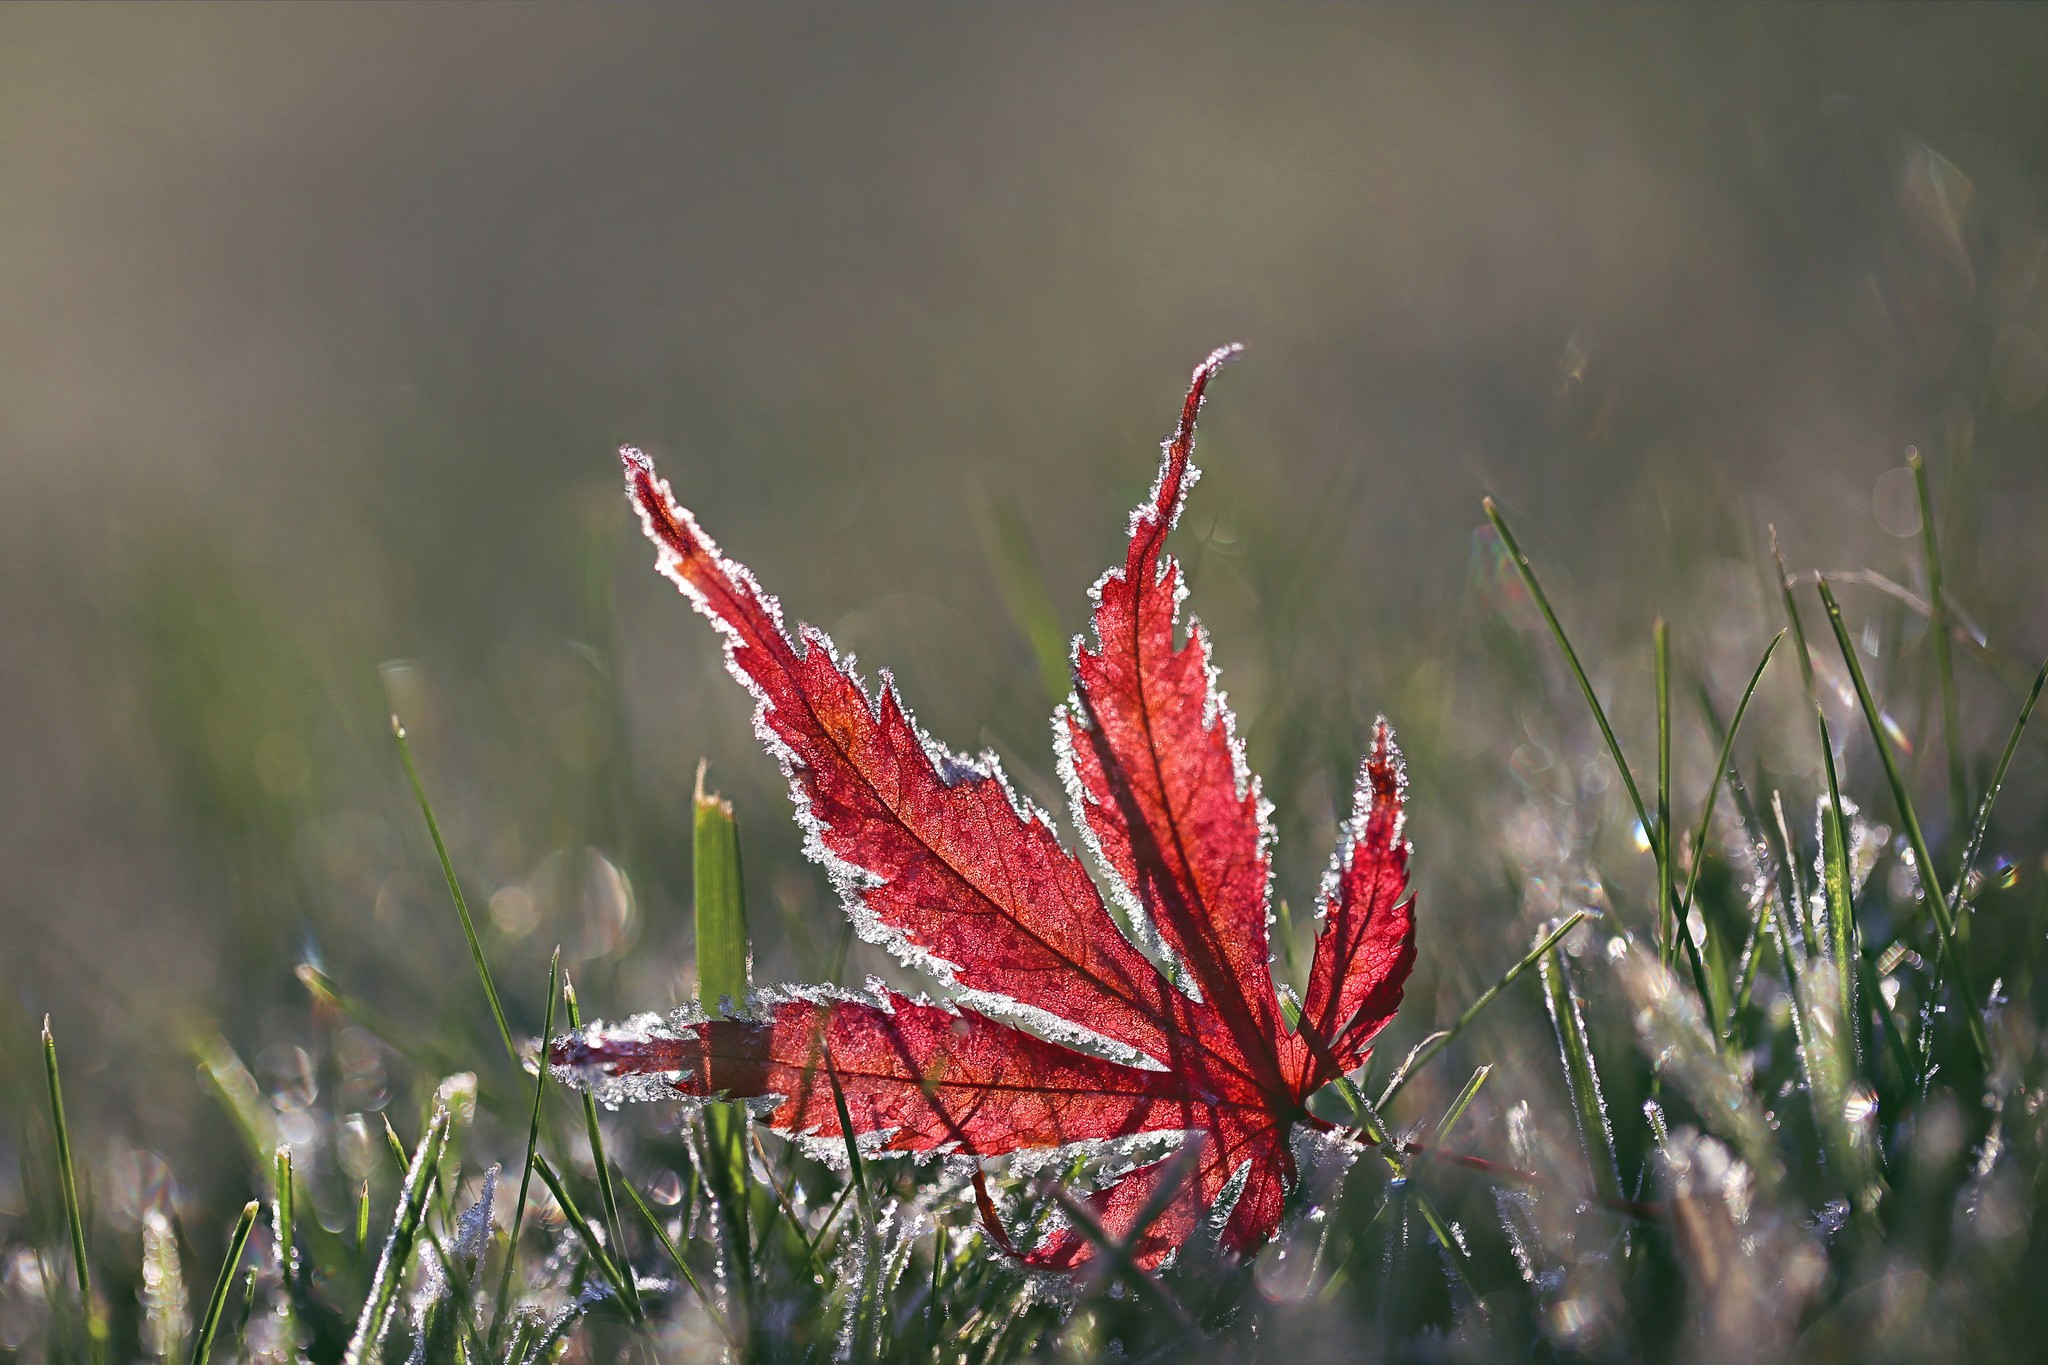 General 2048x1365 leaves grass plants outdoors red leaves